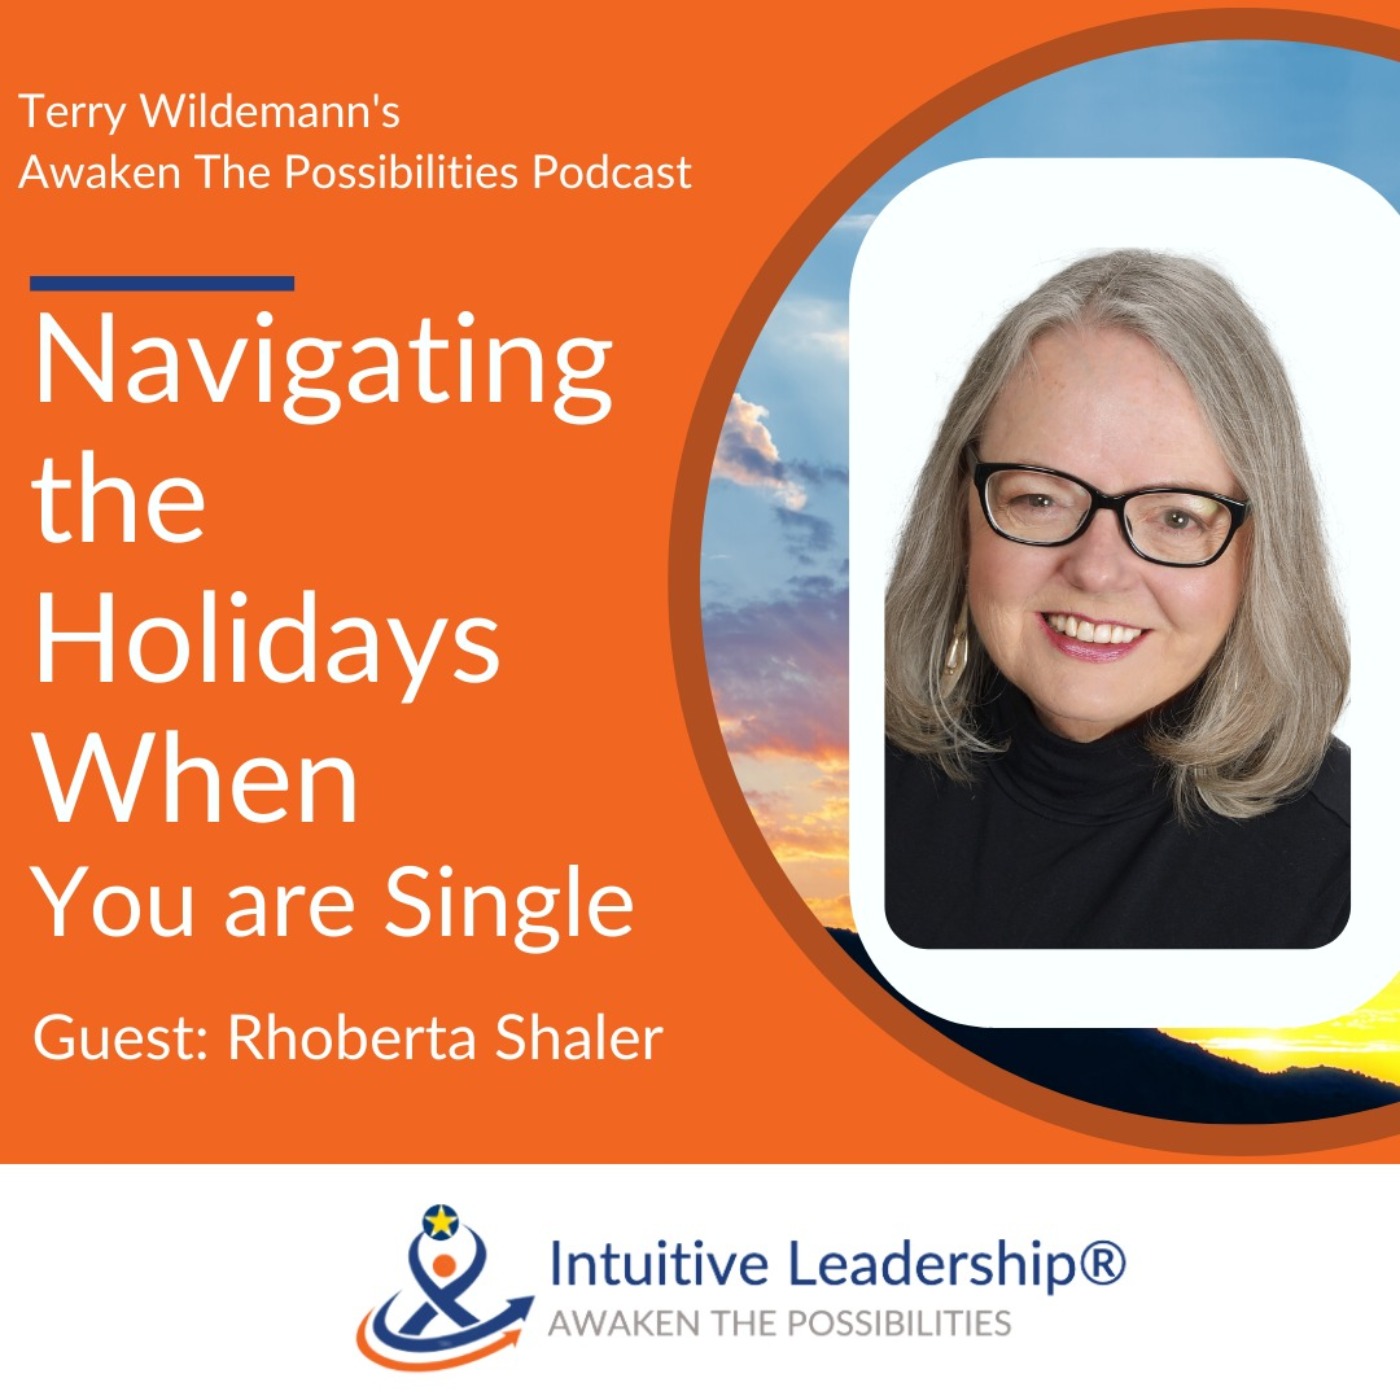 Awaken The Possibilities: Navigating the Holidays When You Are Single